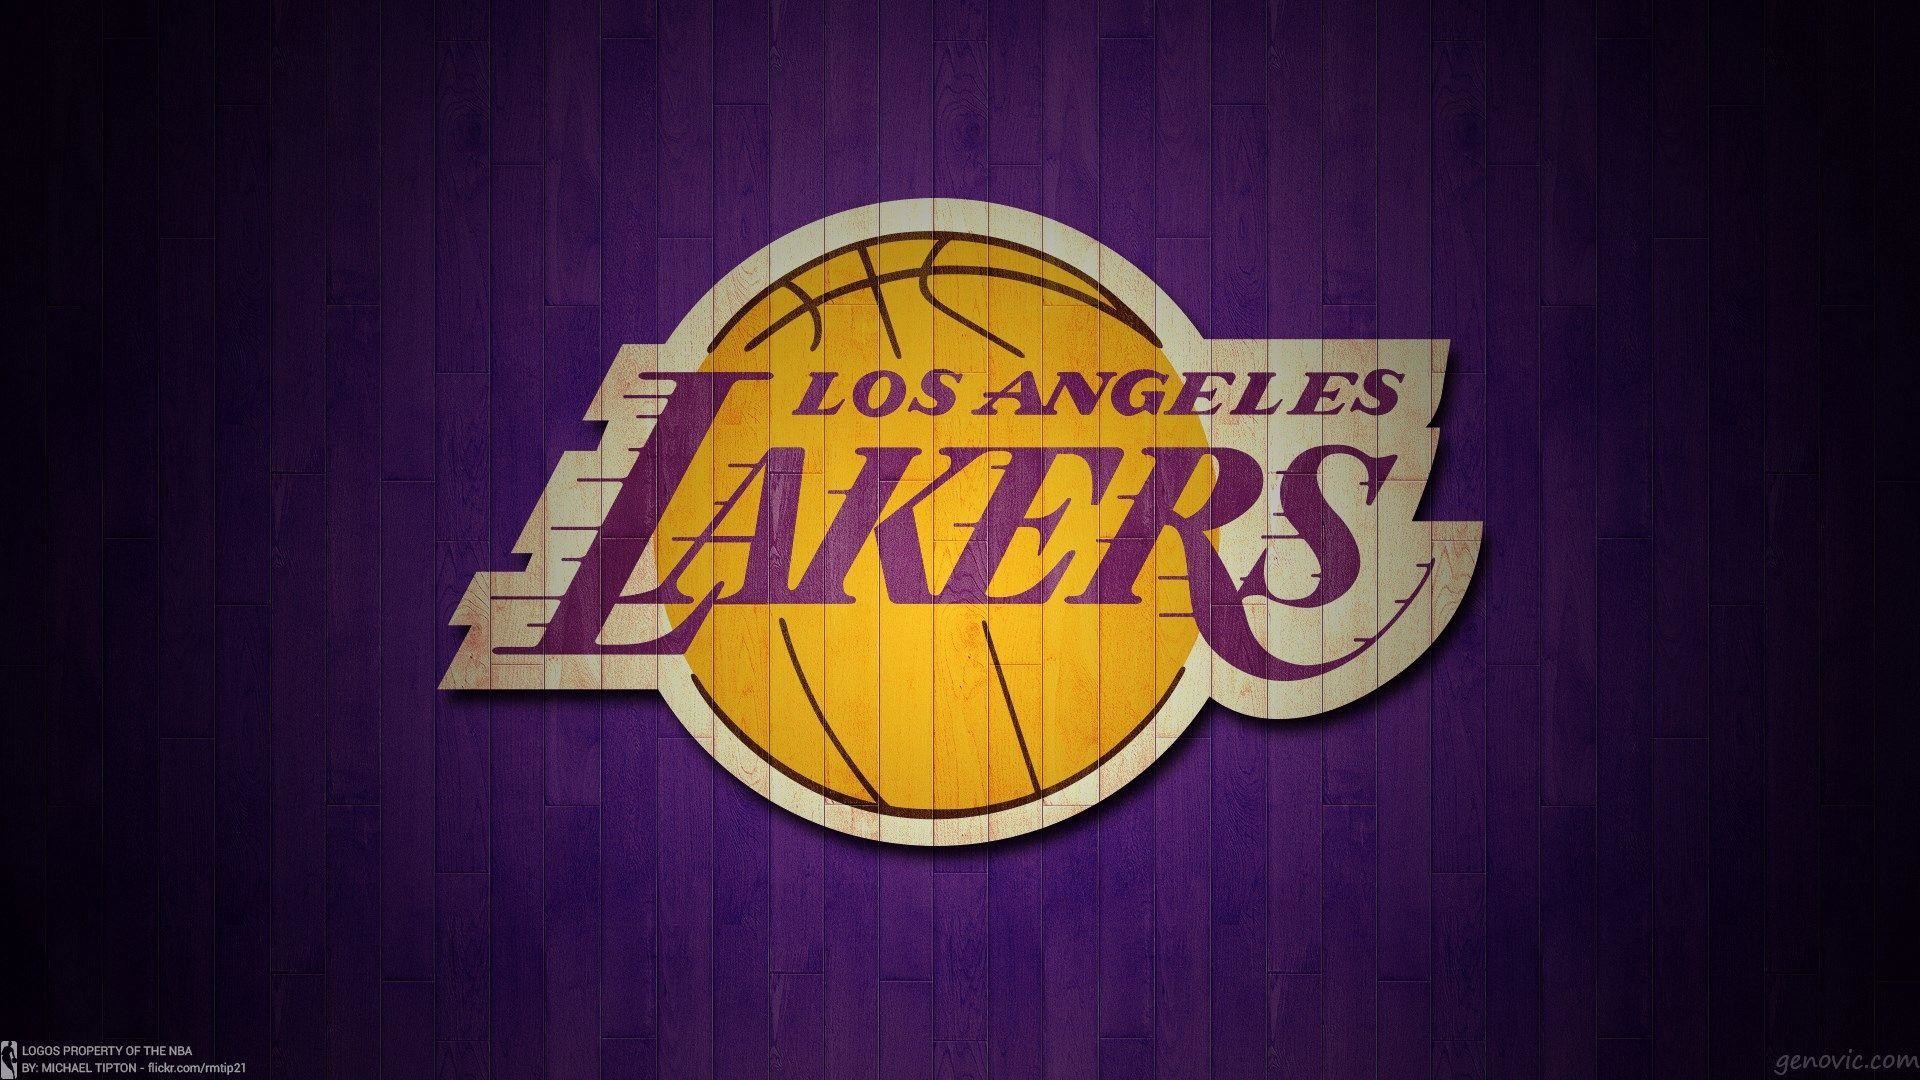 Los Angeles Lakers Wallpaper Hd 26 25187 Images Hd Wallpapers 1920x1080